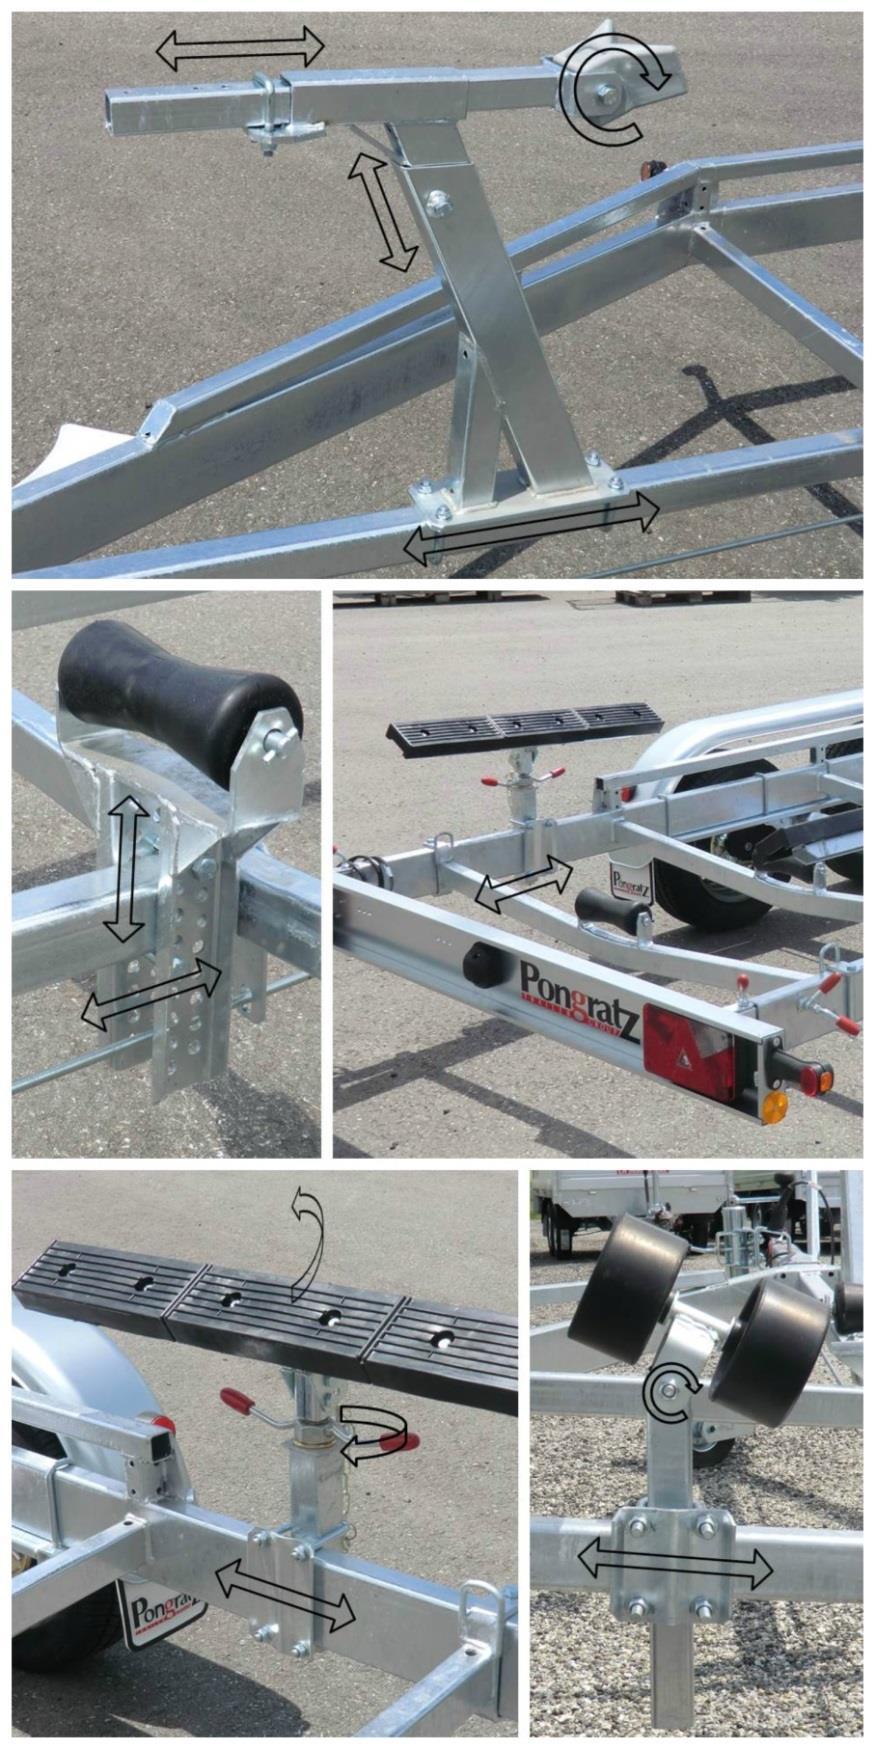 2. Proper adjustment of the boat trailer In order to be able to use your trailer optimally, some one-time adjustments need to be done when loading the boat for the first time.